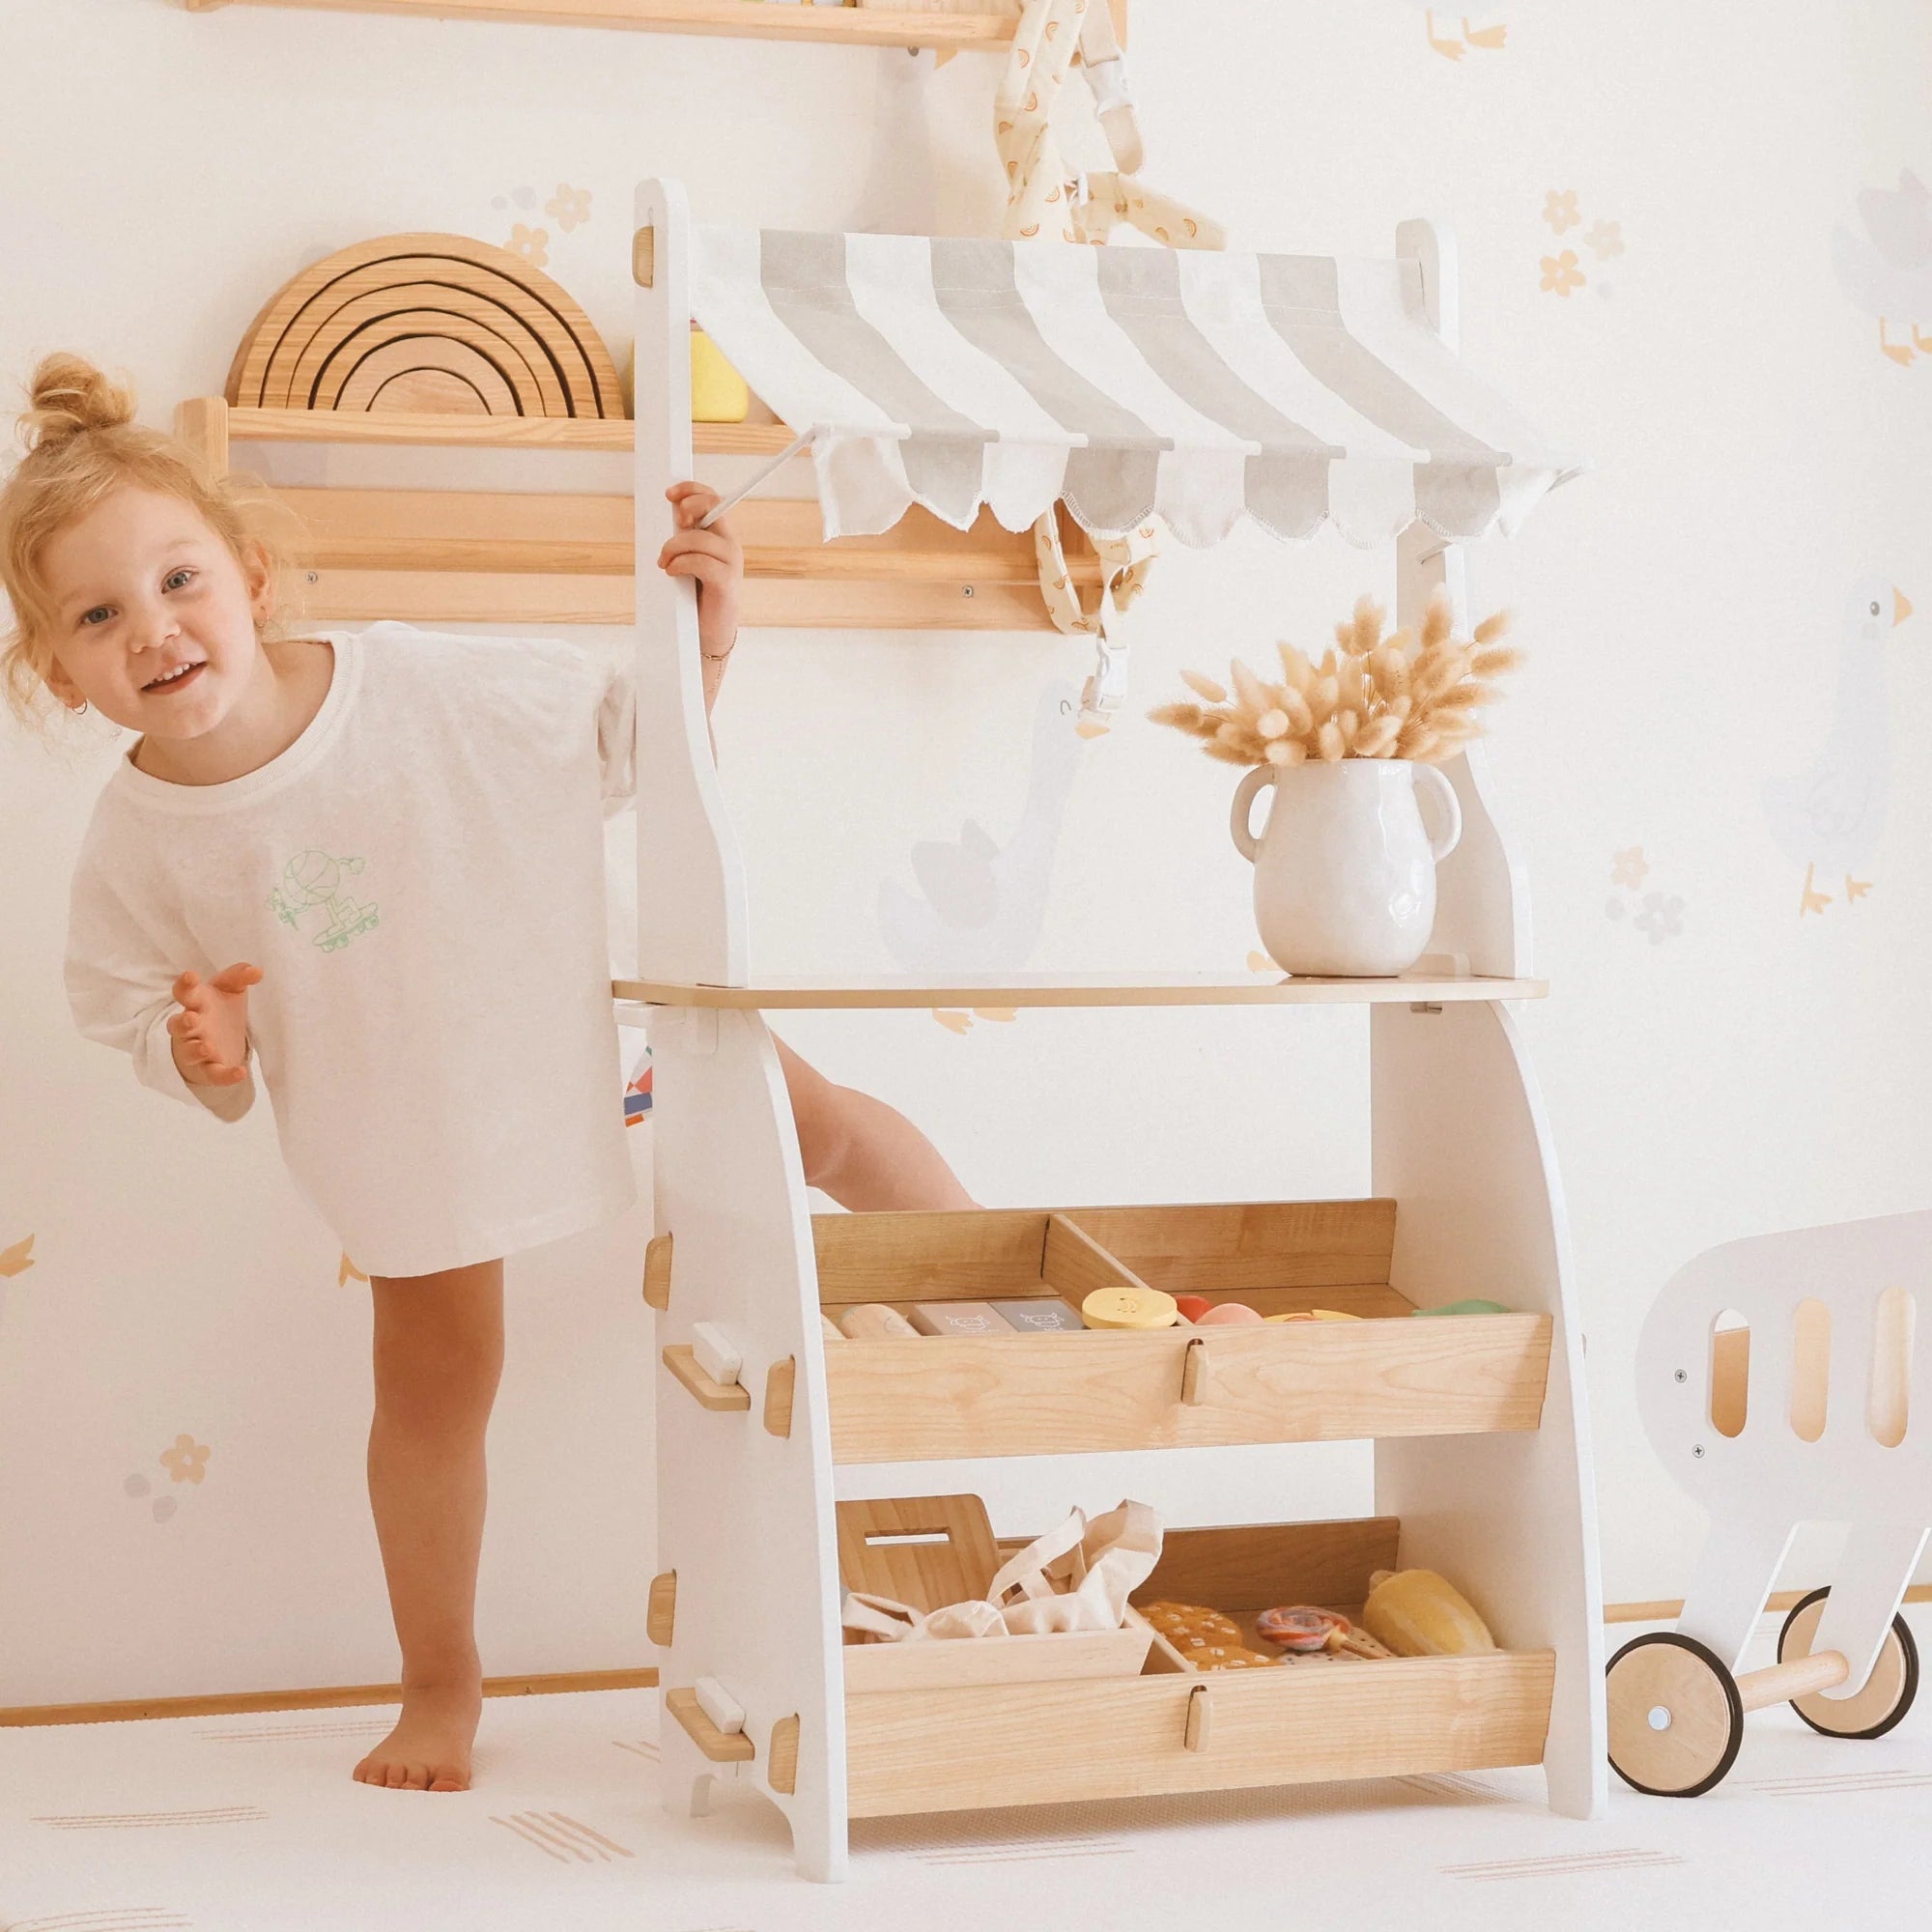 Why Parents Should Choose Wooden Toys